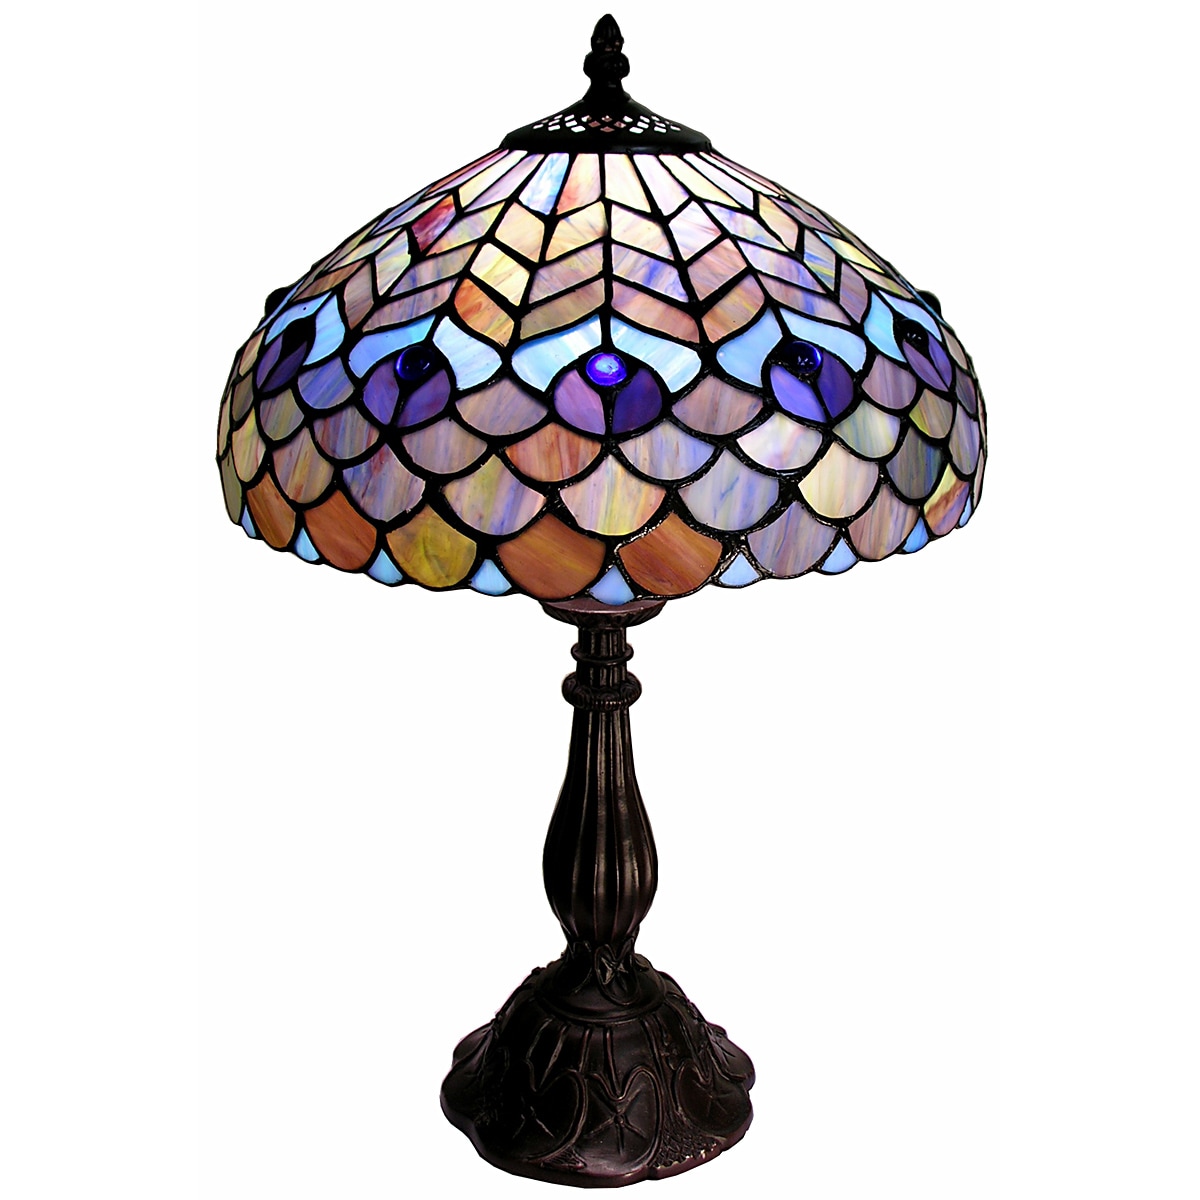 Tiffany-style Peacock Table Lamp - Free Shipping Today ...